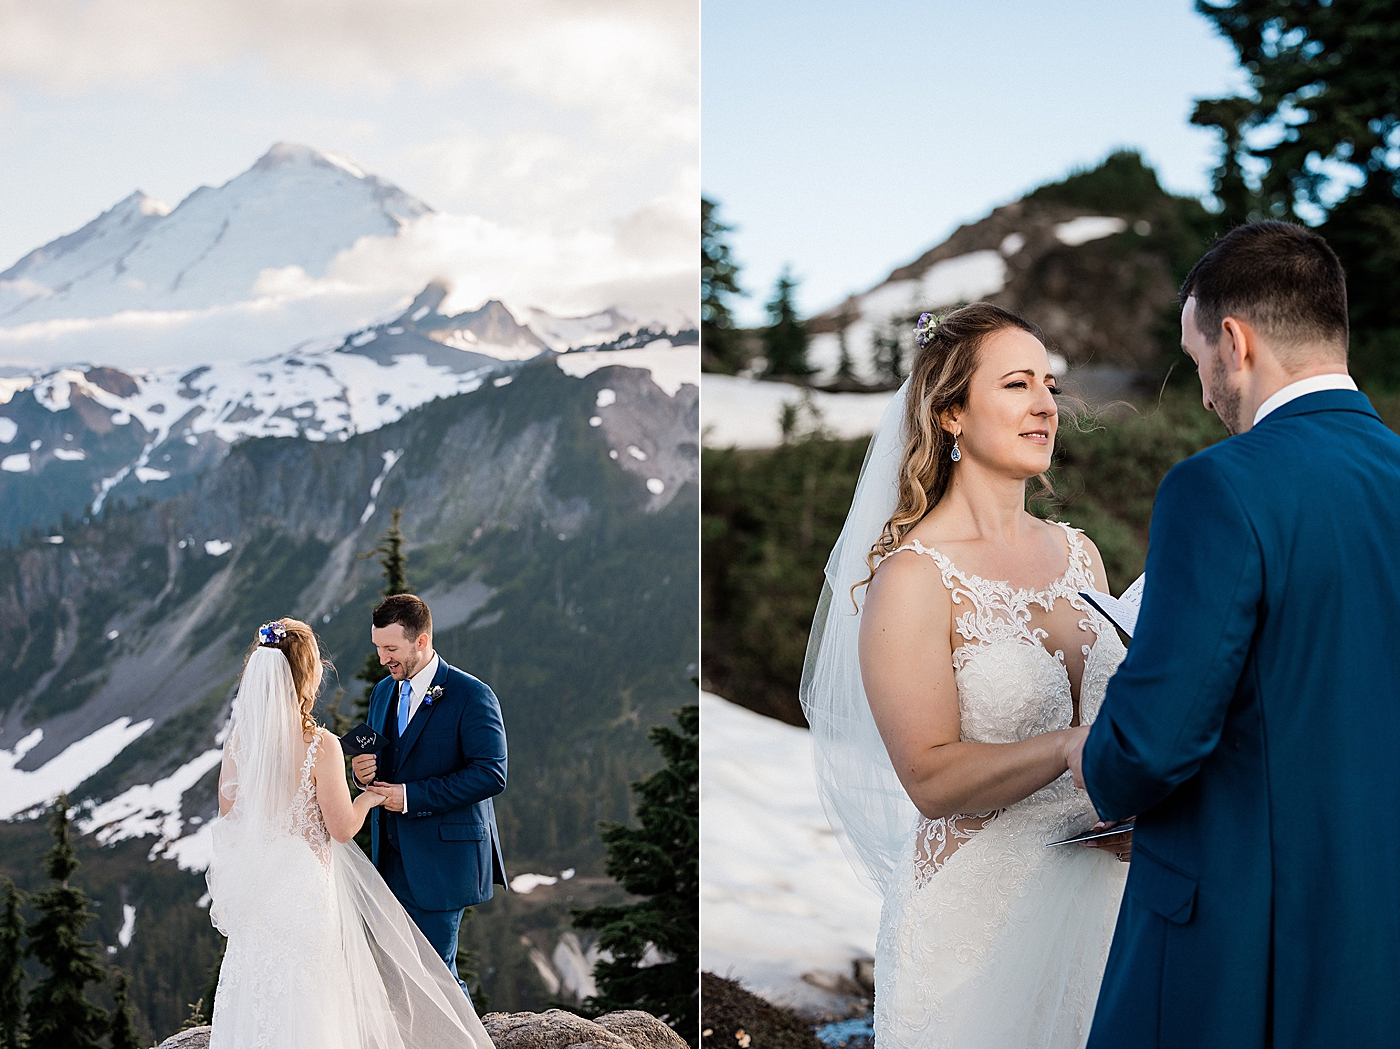 Summer elopement with snow in the background at Artist Point. Photo by Megan Montalvo Photography.